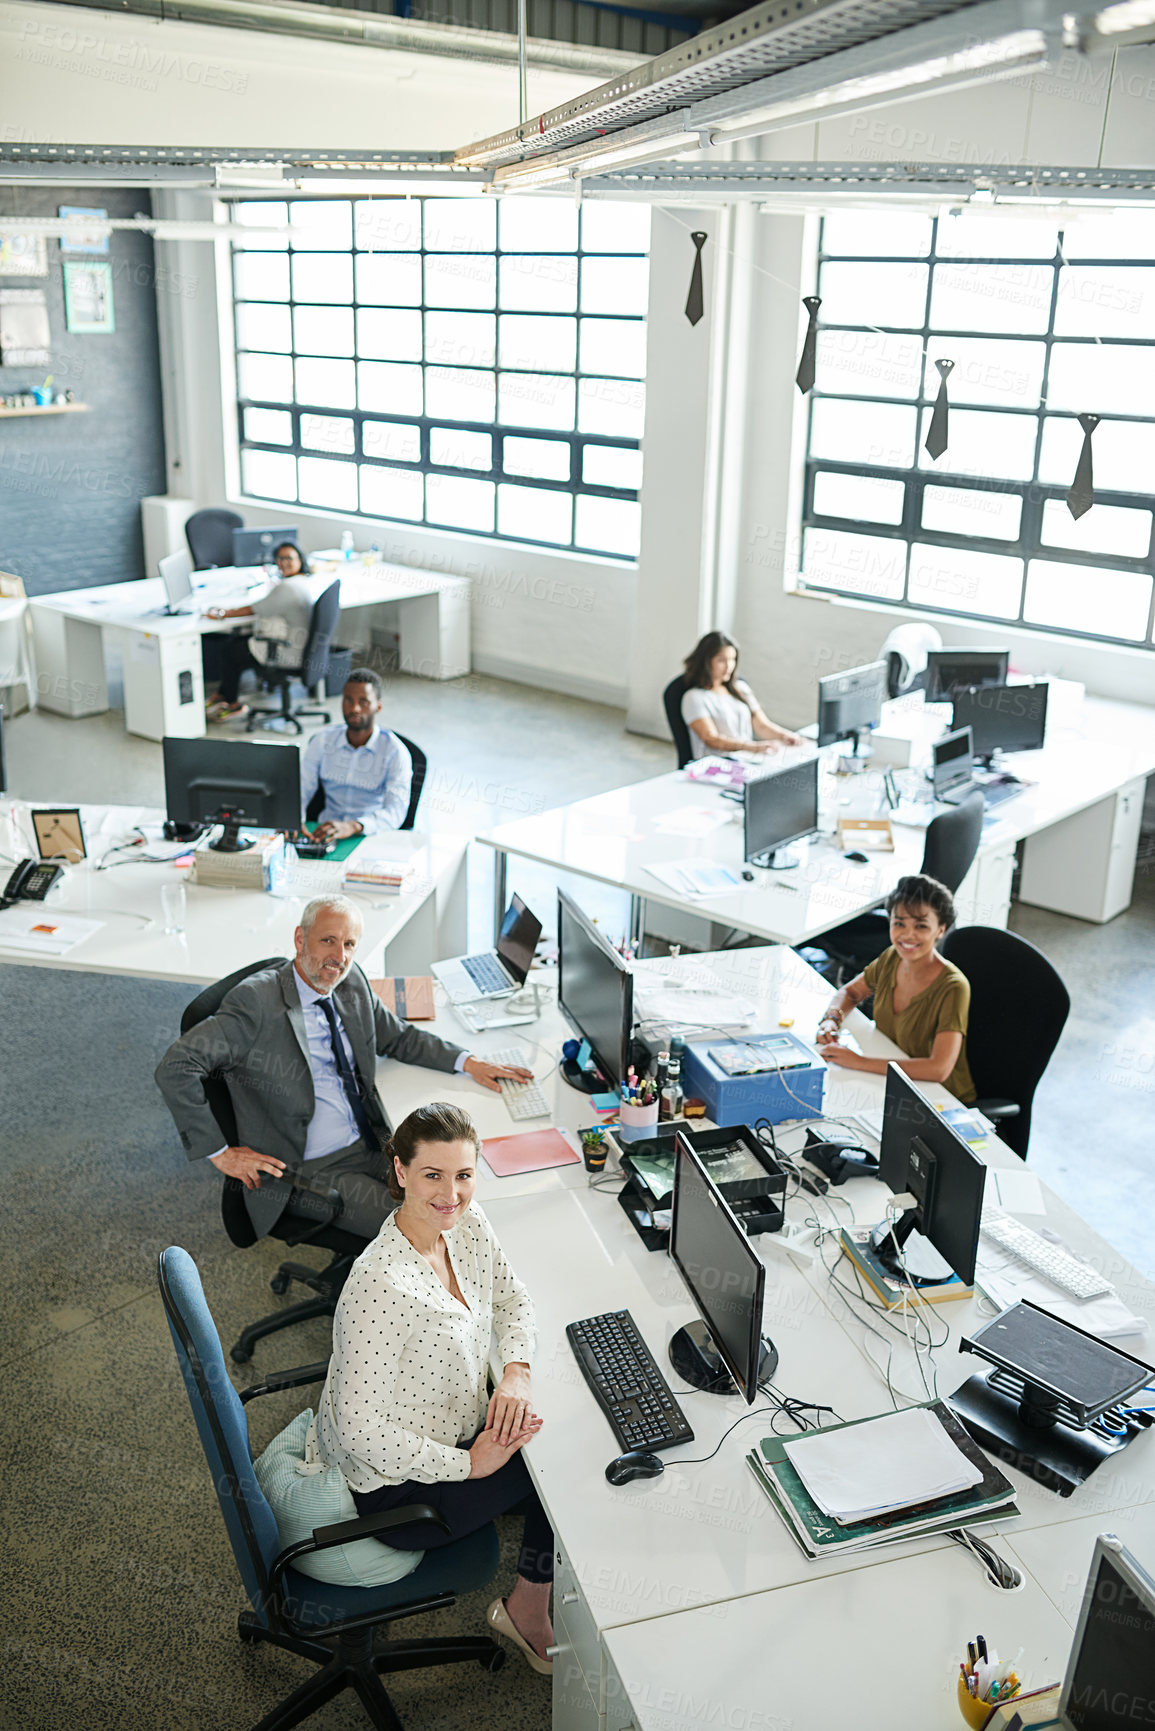 Buy stock photo Portrait of a group of coworkers sitting at their workstations in an office